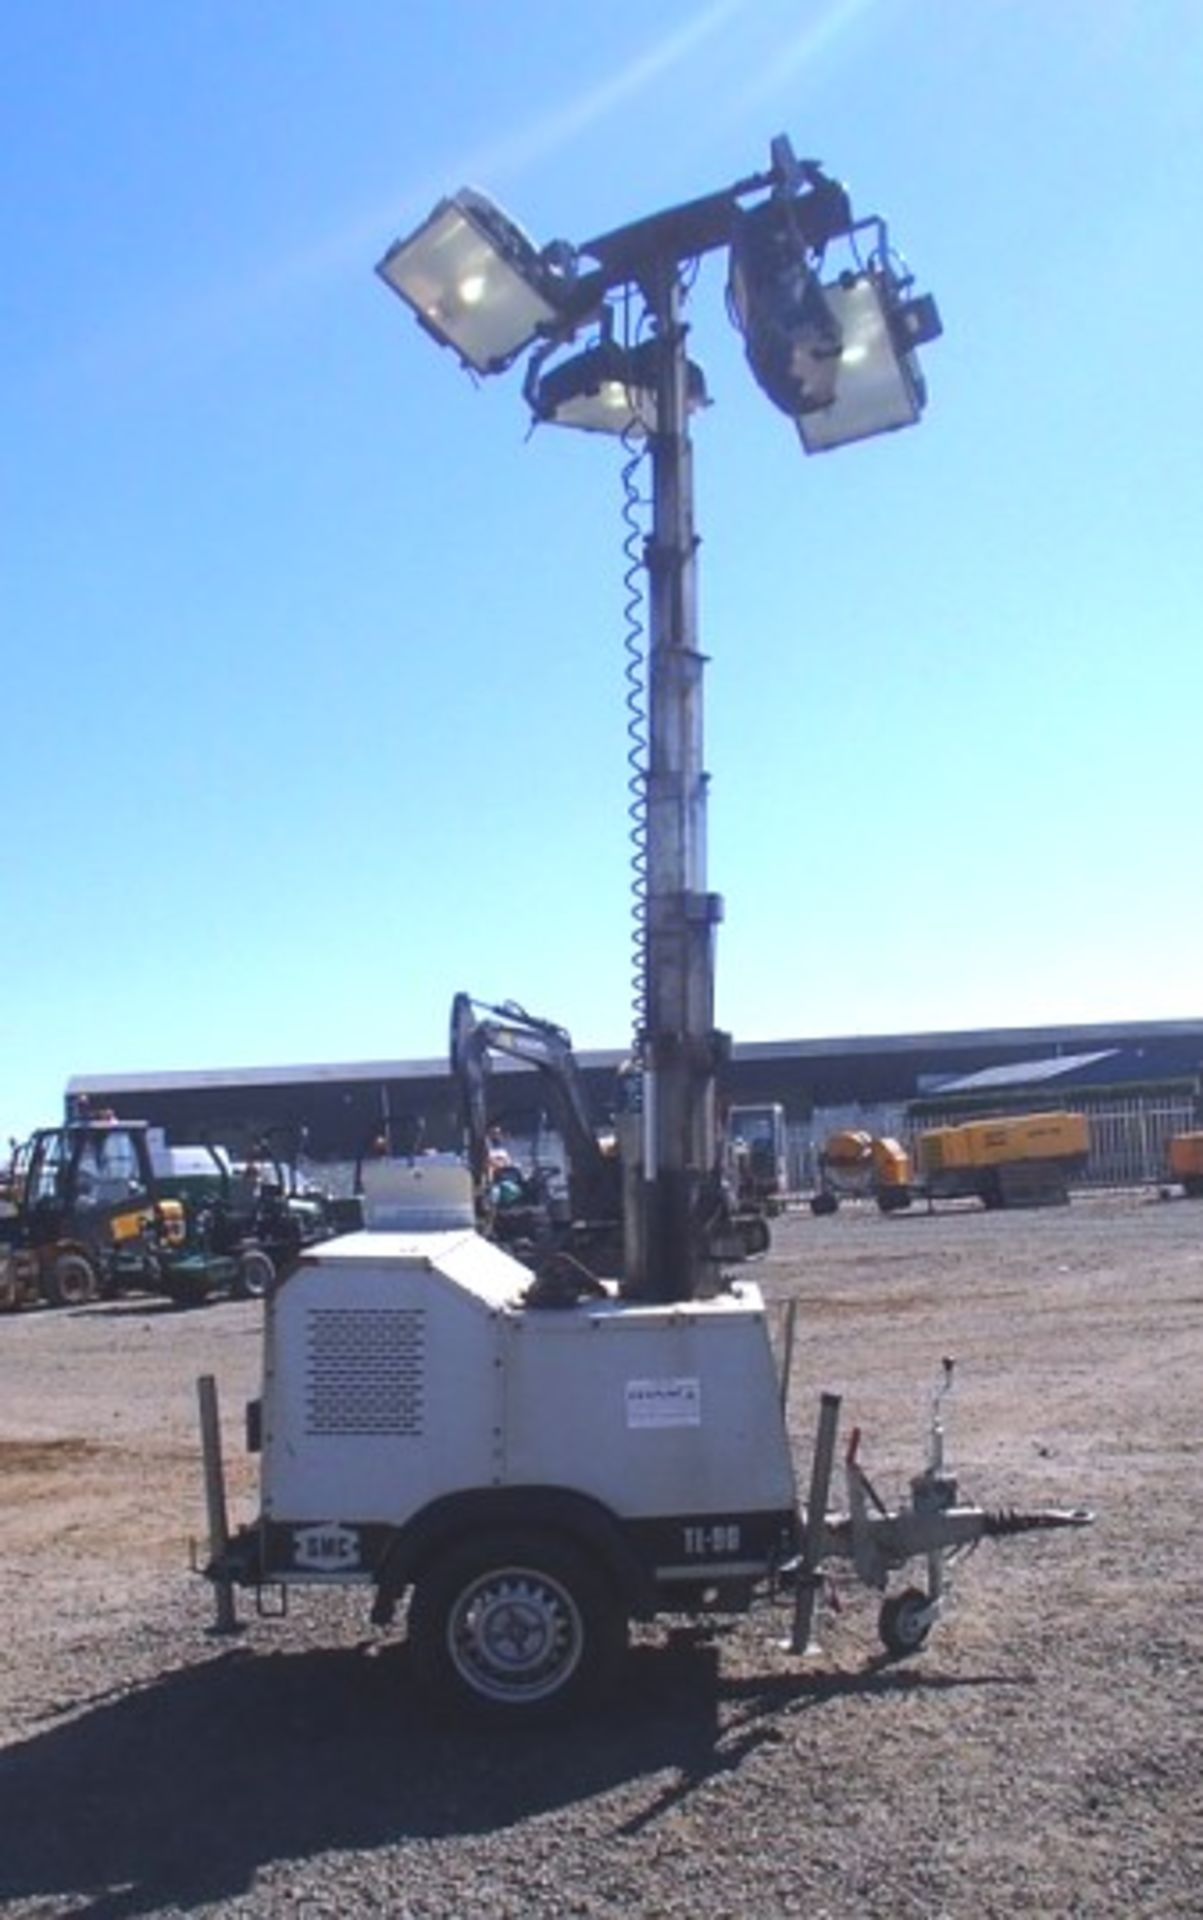 2010 SMC TL-90 SN t90108721 TOWABLE TOWER LIGHTS. ENGINE POWR 7.7KW@1500RPM. 932 HRS - Image 2 of 6